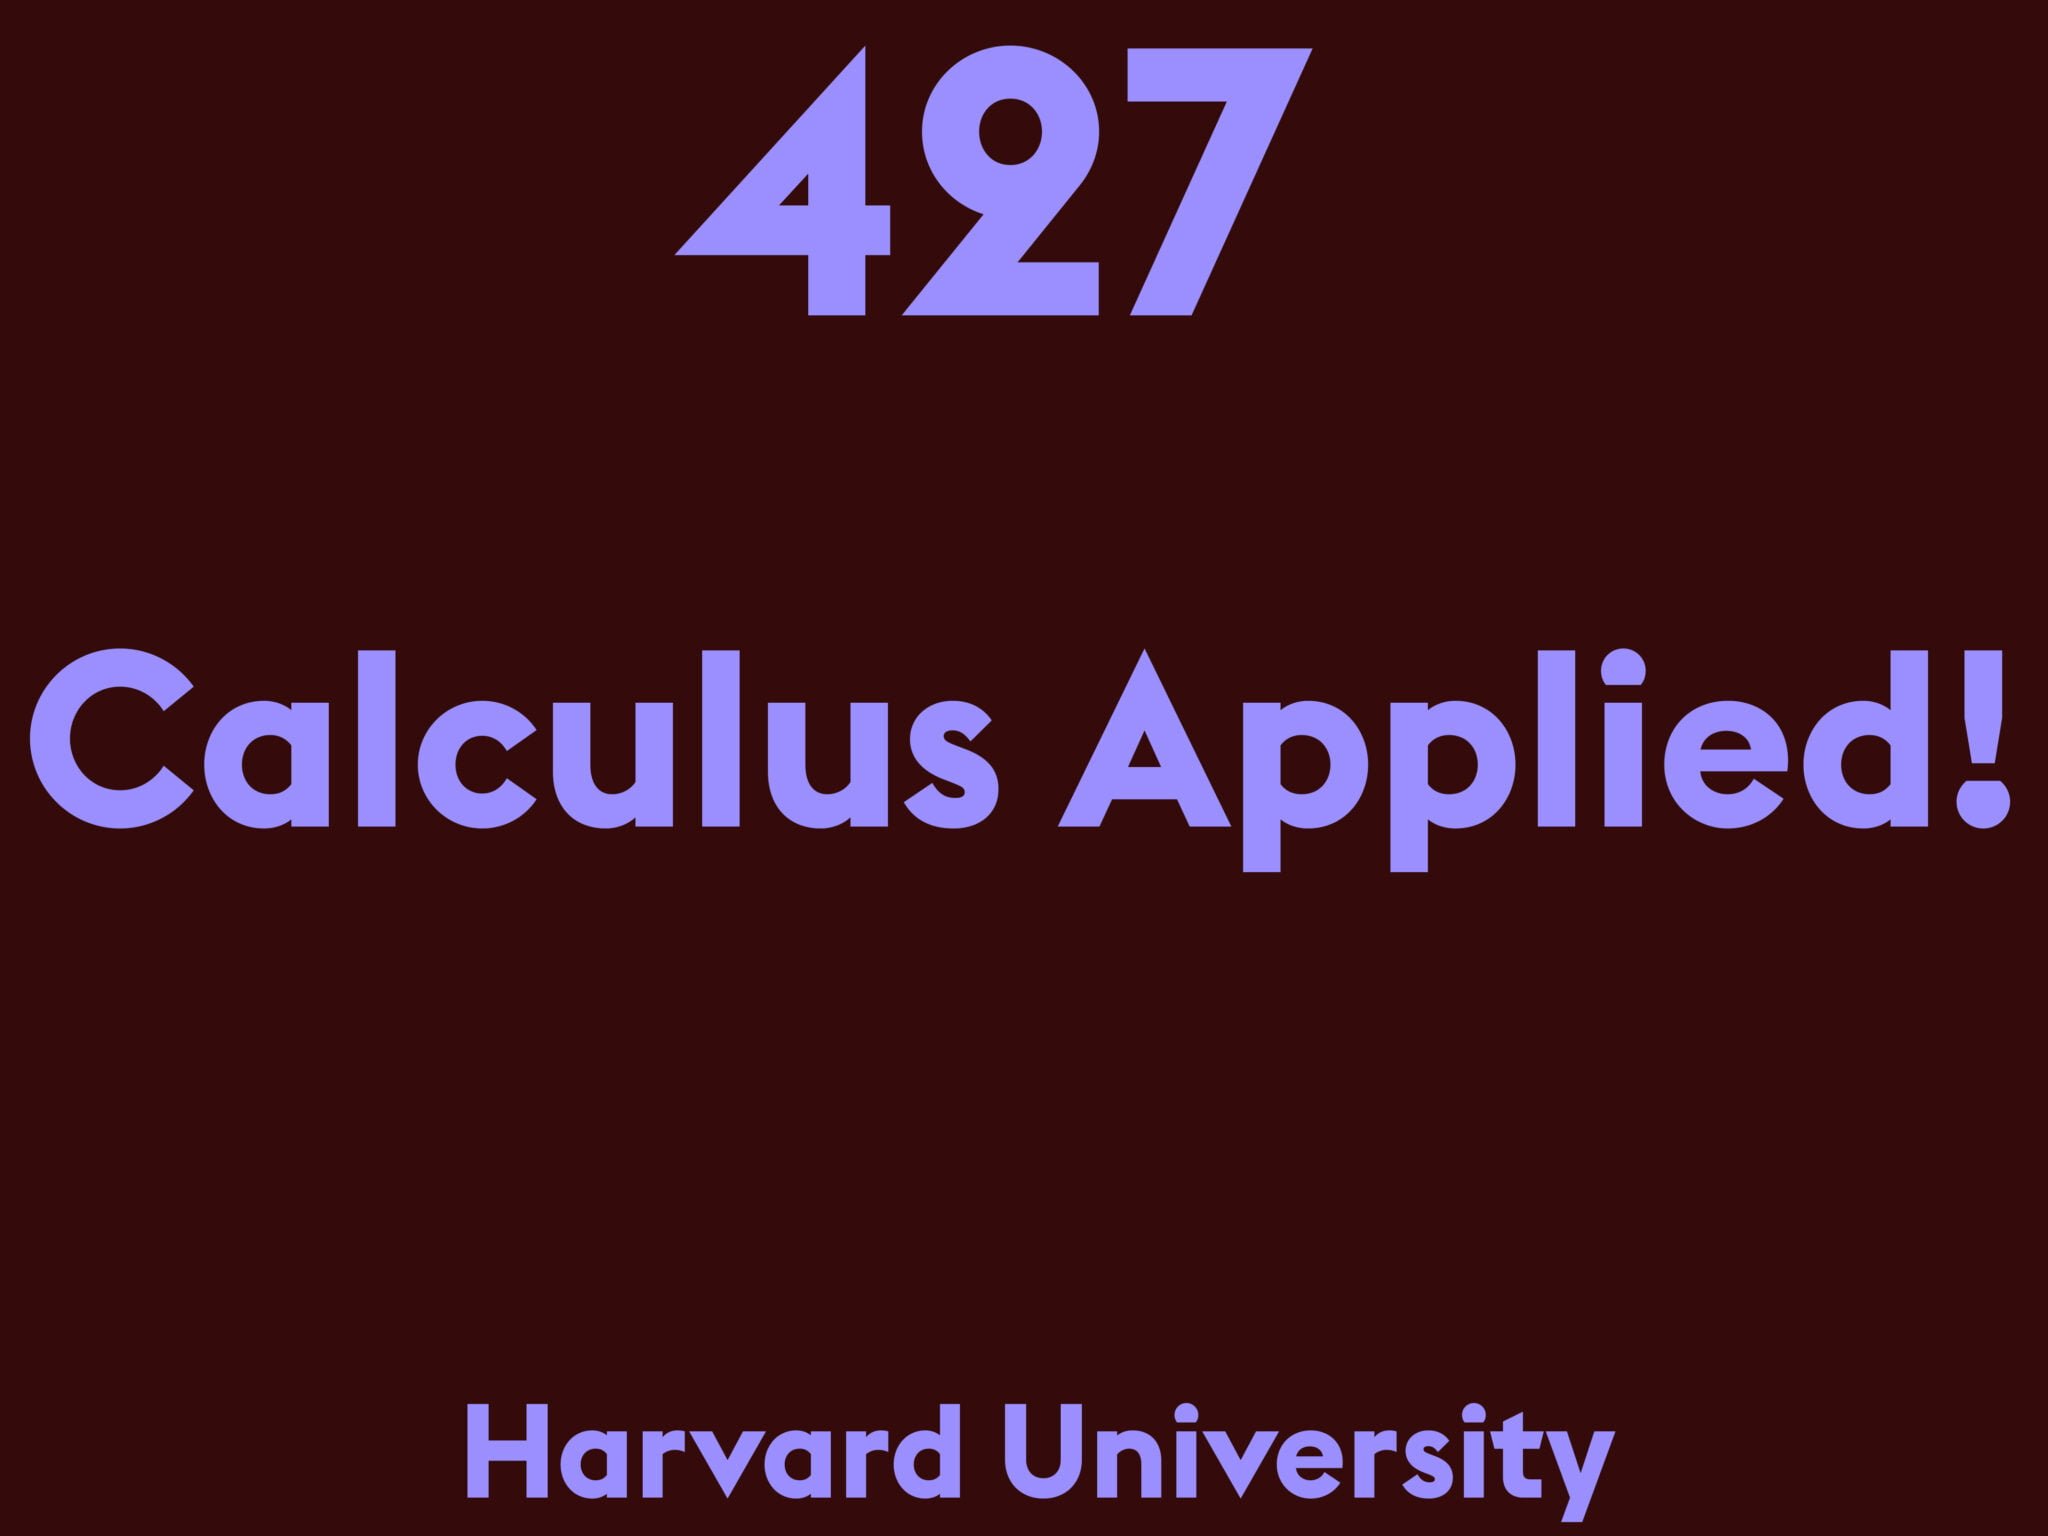 Calculus Applied!